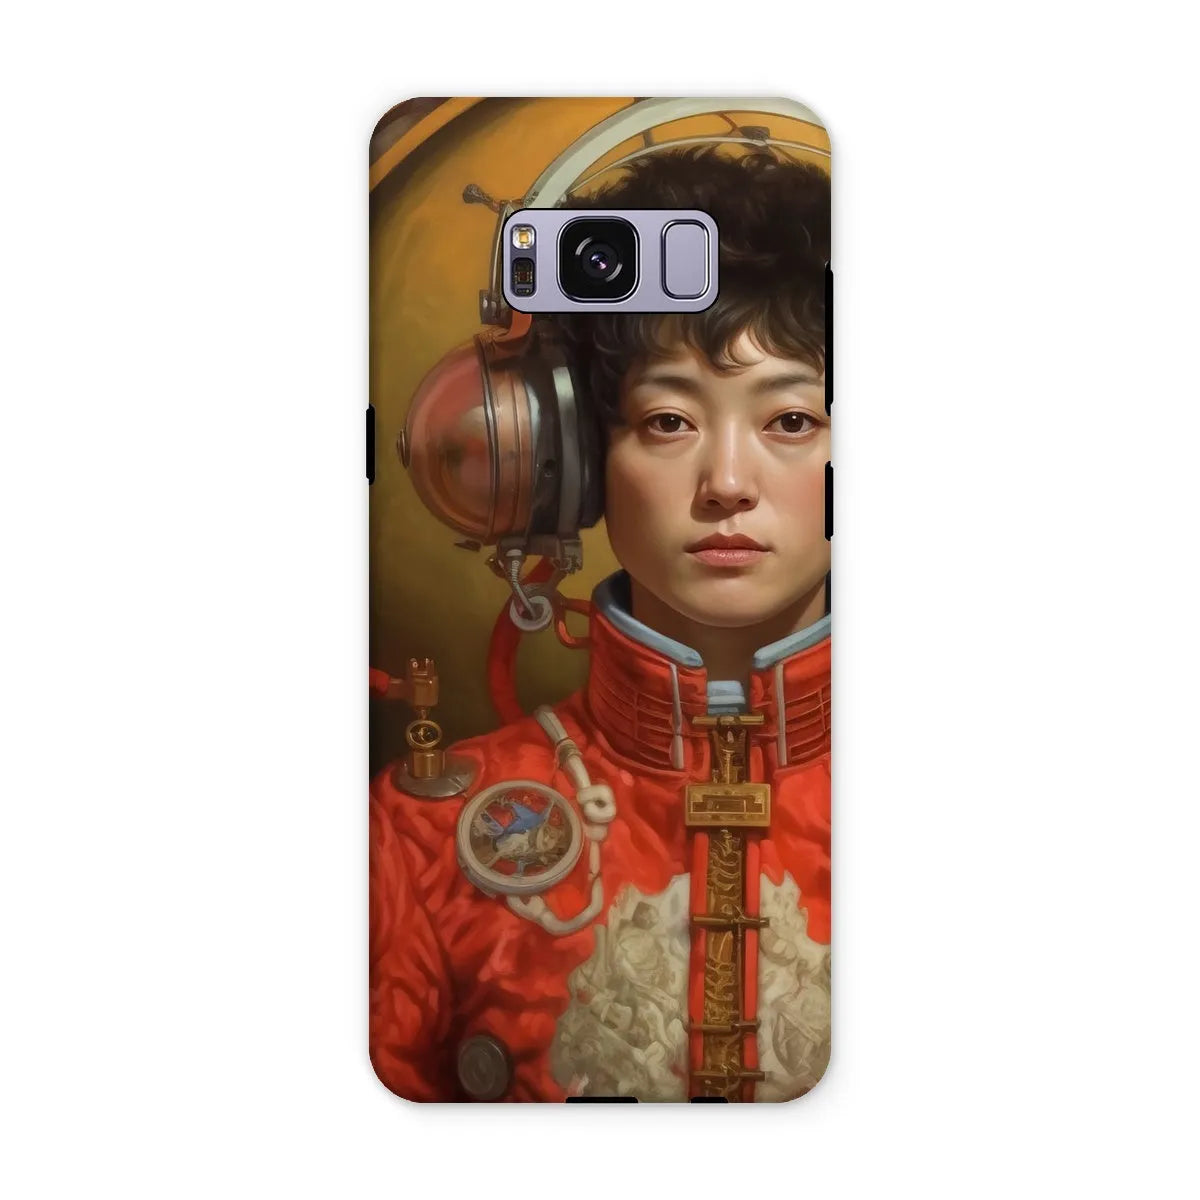 Mùchén - Gay Chinese Astronaut Aesthetic Phone Case - Samsung Galaxy S8 Plus / Matte - Mobile Phone Cases - Aesthetic